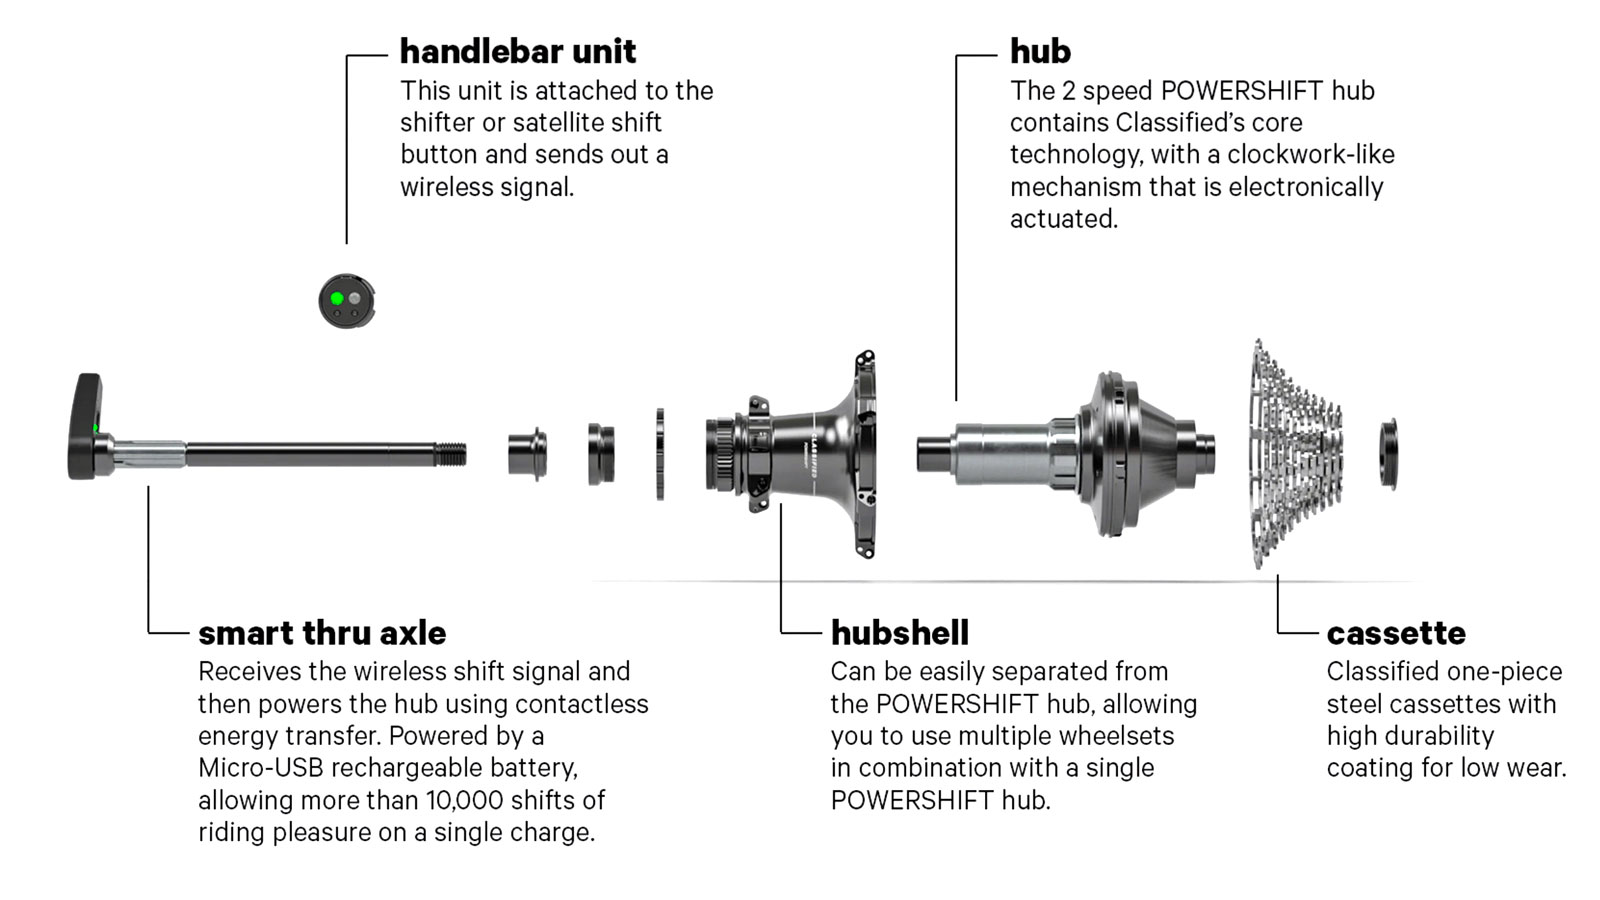 Classified Carbon Wheelsets, gravel & all-road wheels with wireless 2x internal gear hub built-in, Powershift hub system exploded view